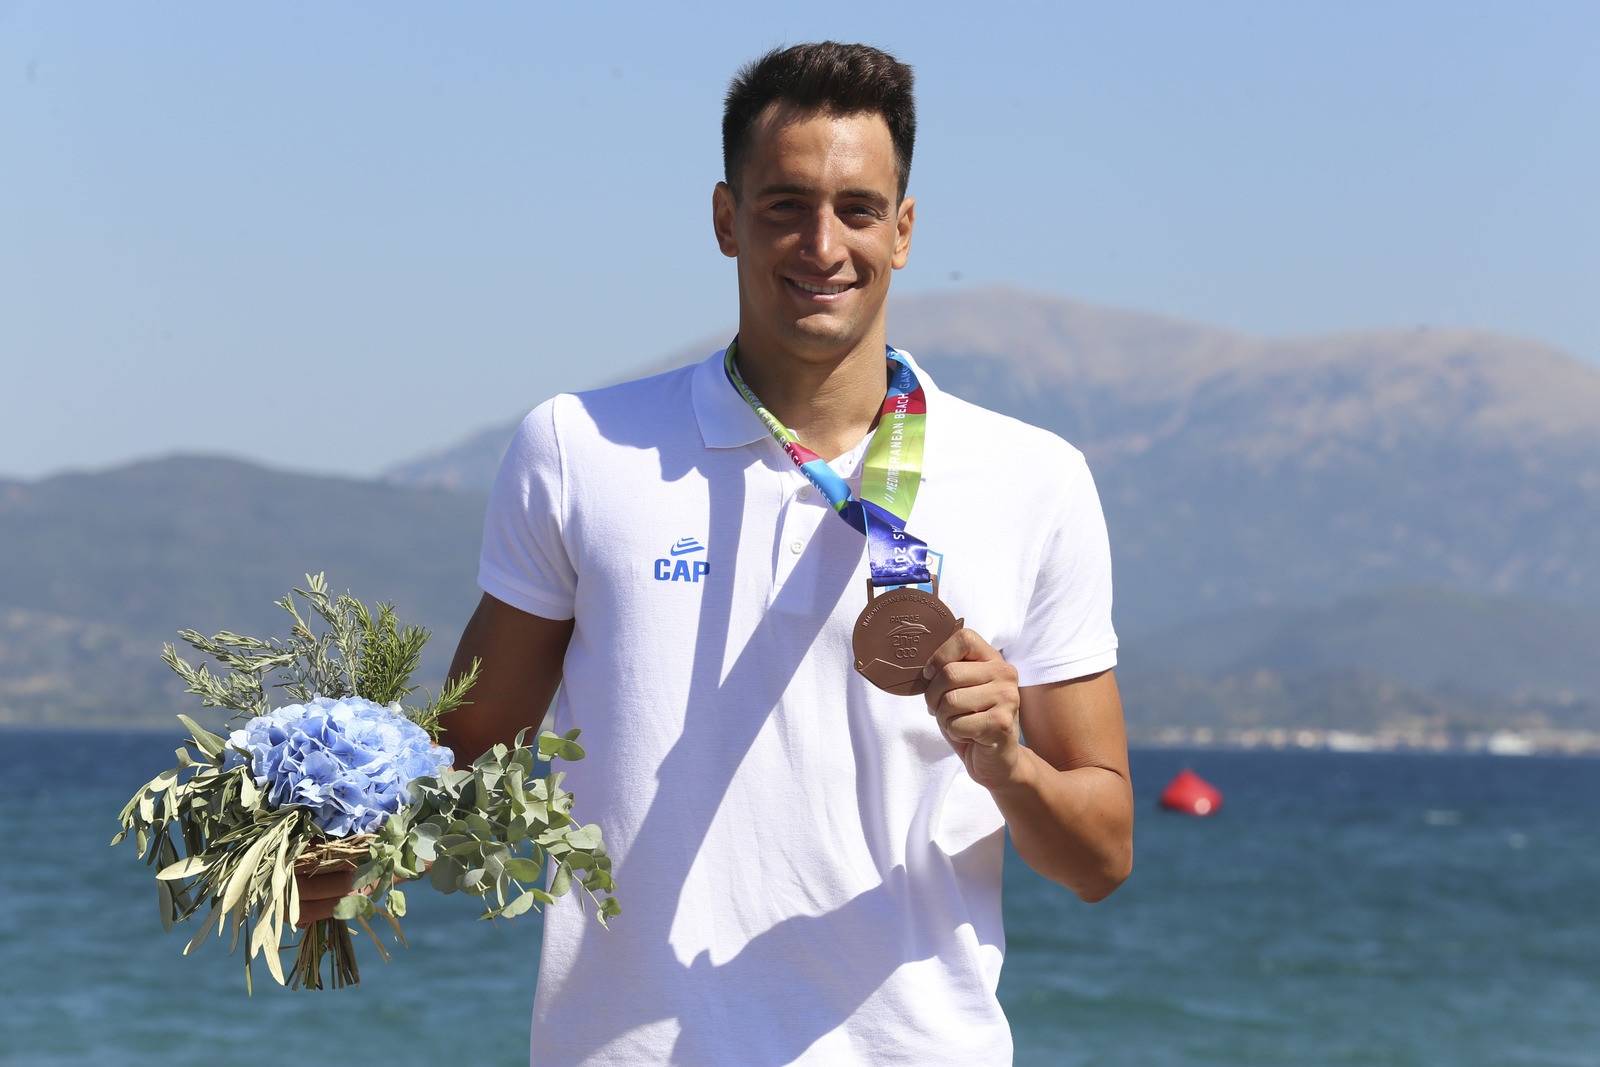 Greece's Georgios Arniakos was the only non-Italian medallist in the 5km open water swimming events after claiming the men's bronze ©Patras 2019